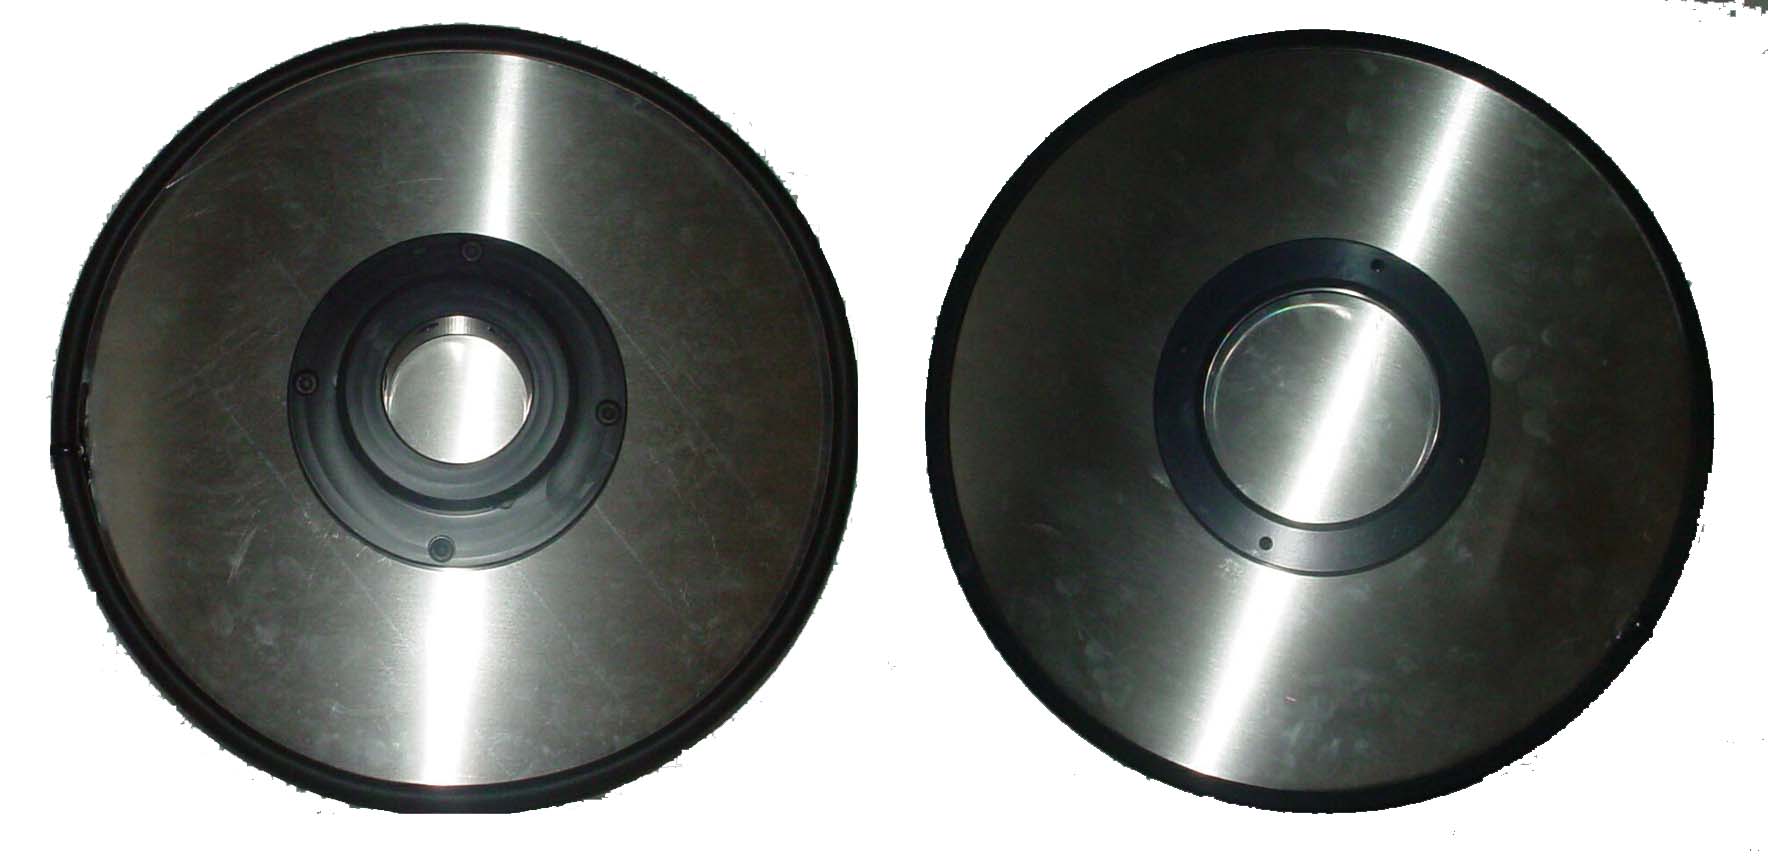 QC-200 Series Stand-alone Dust Cover (Top & Bottom shown)